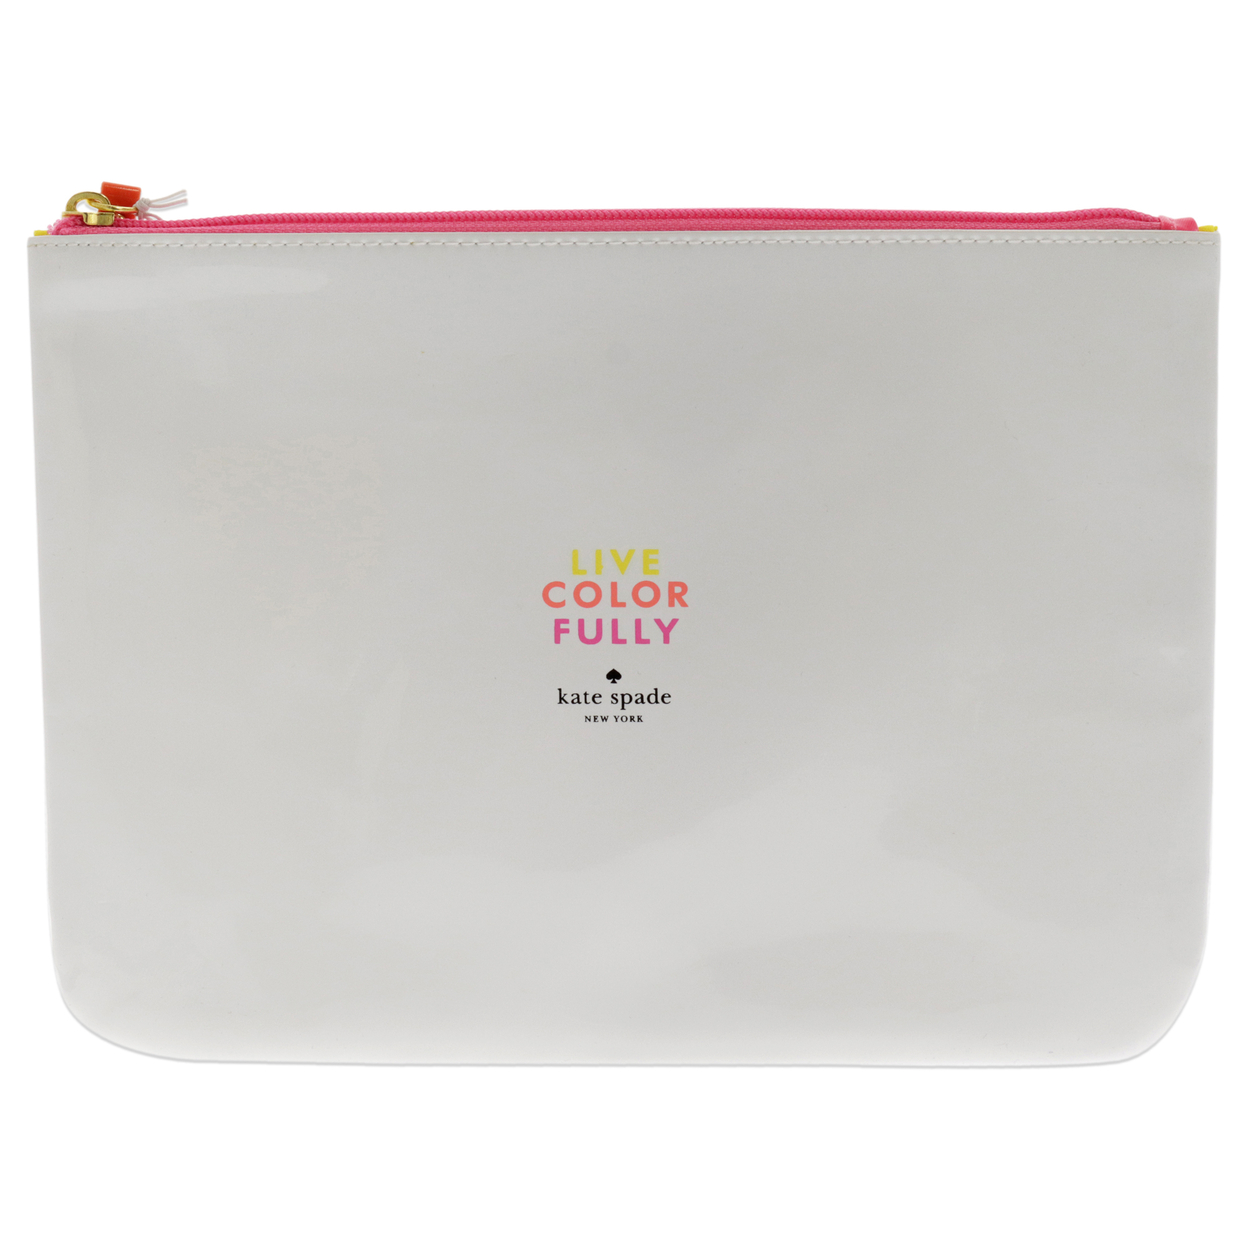 Kate Spade Live Colour Fully - White-Pink Bag 1 Pc